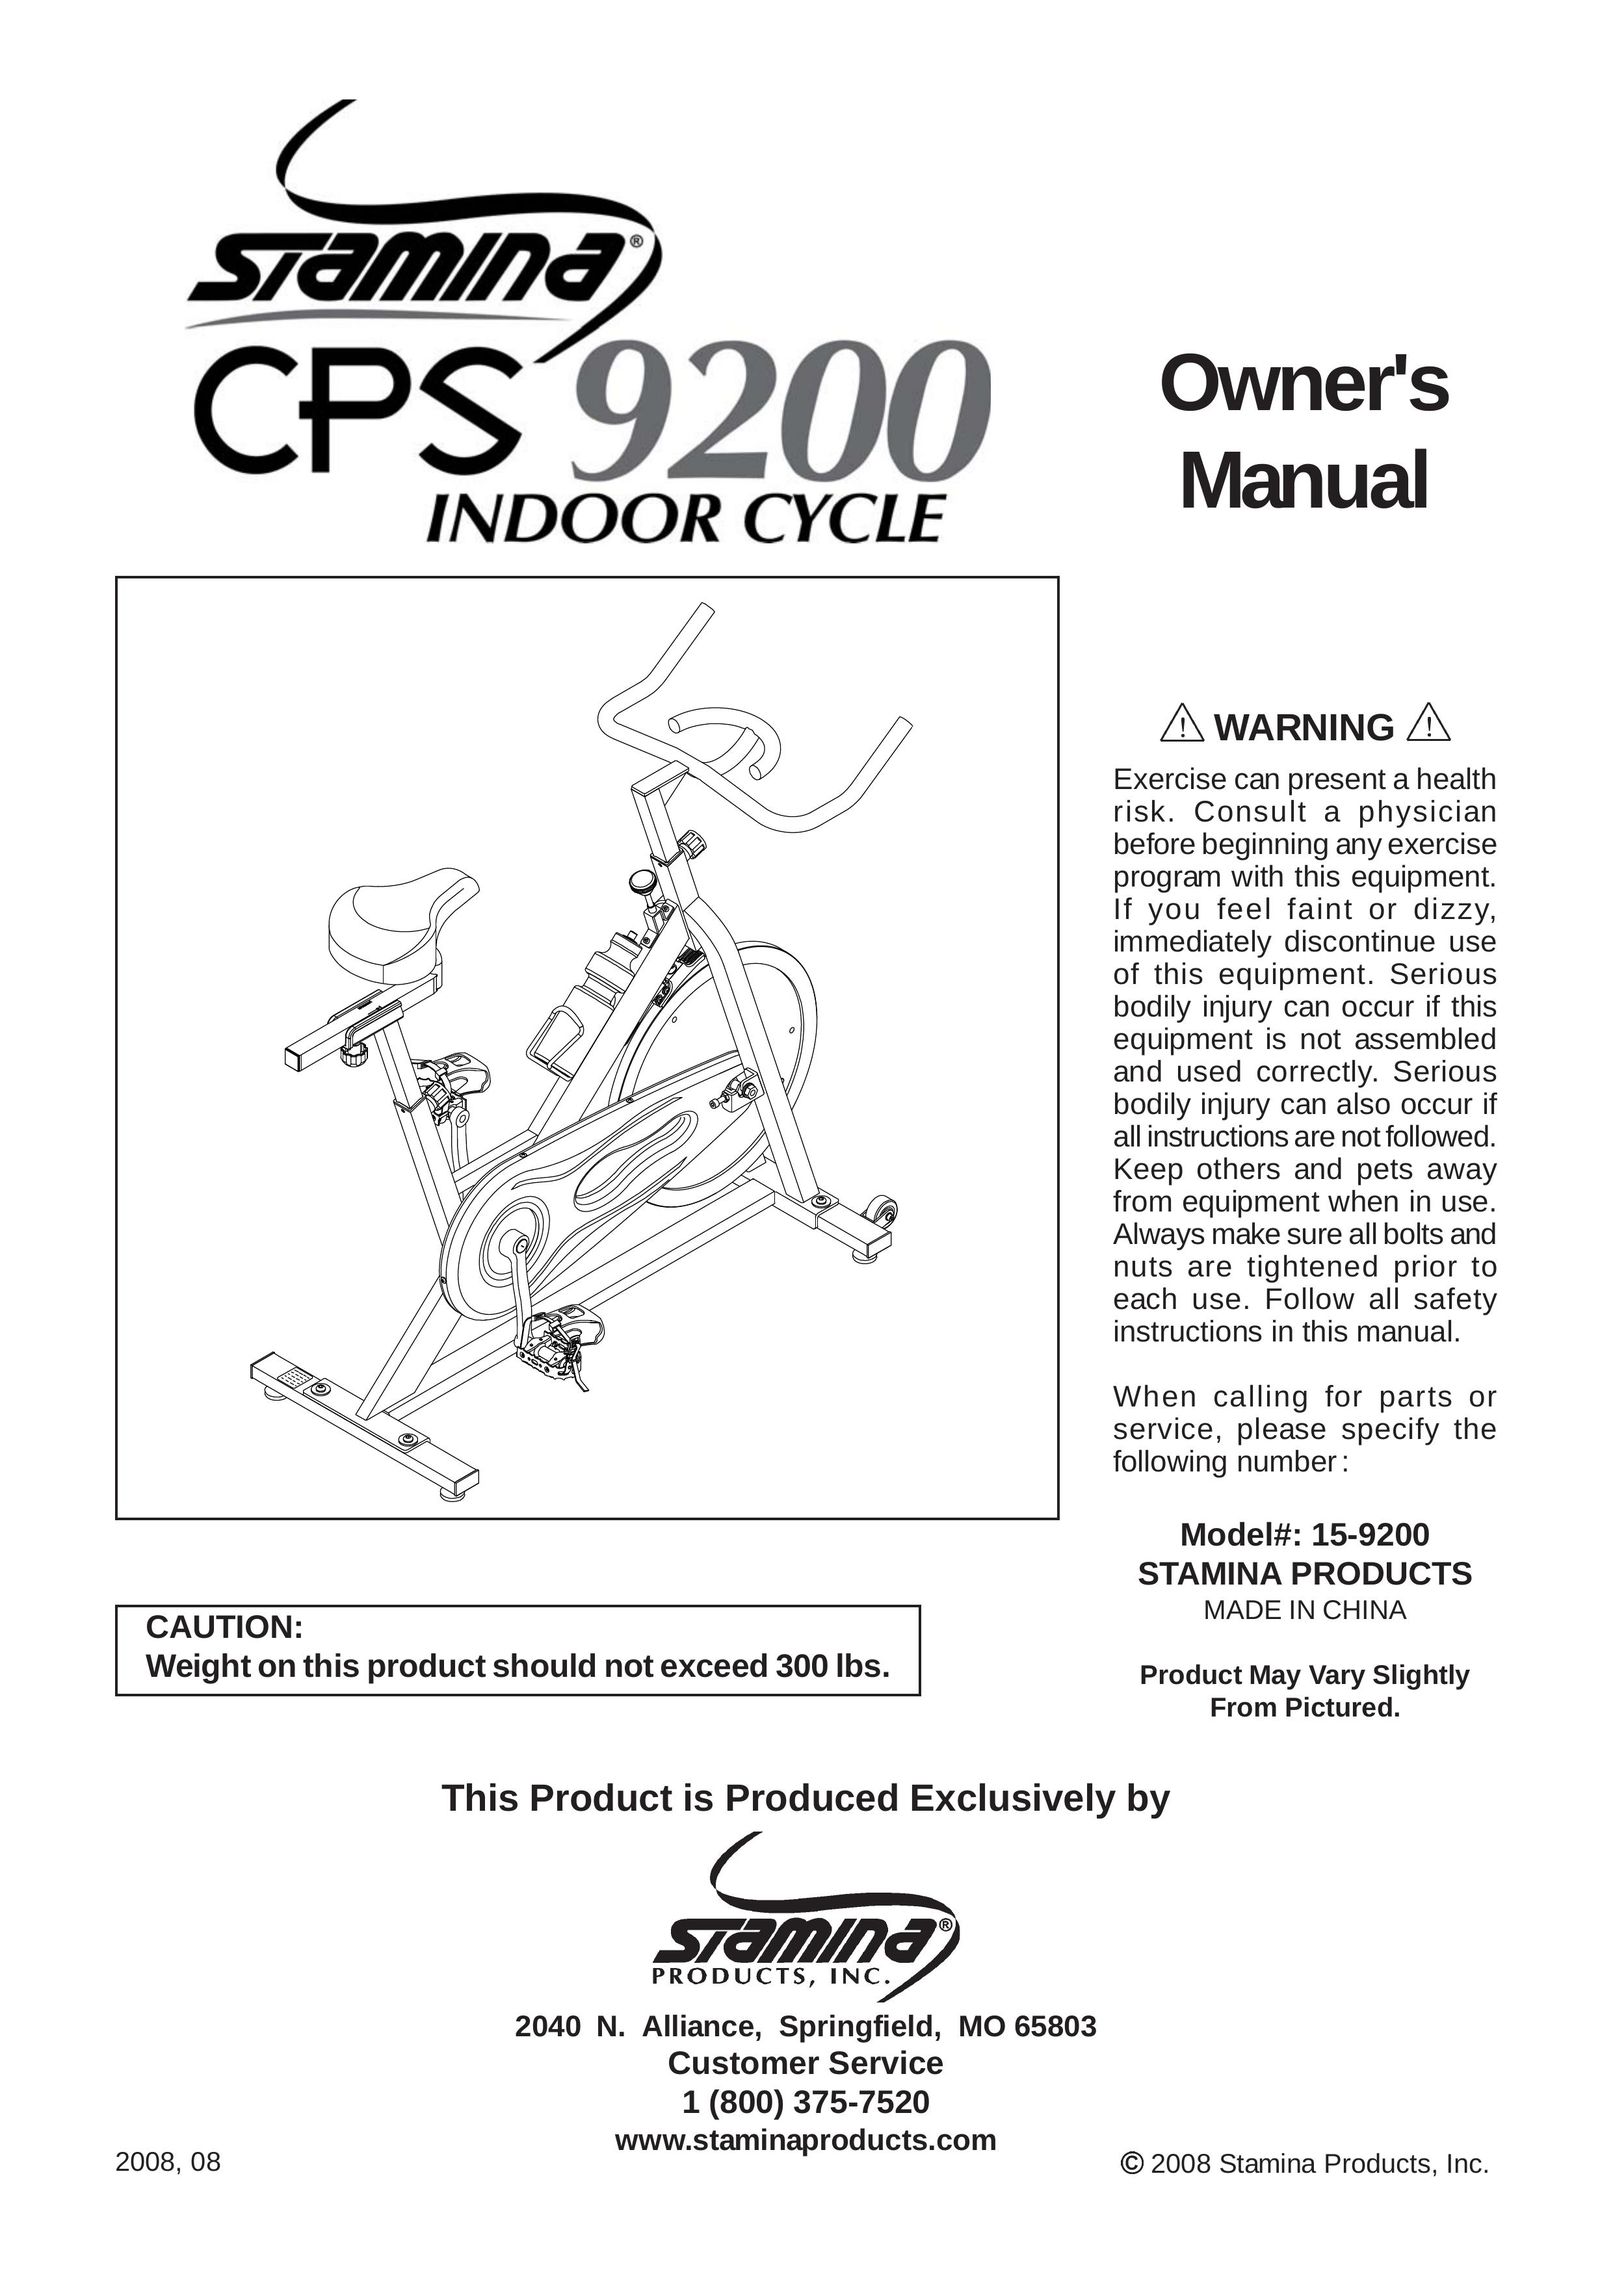 Stamina Products 15-9200 Bicycle User Manual